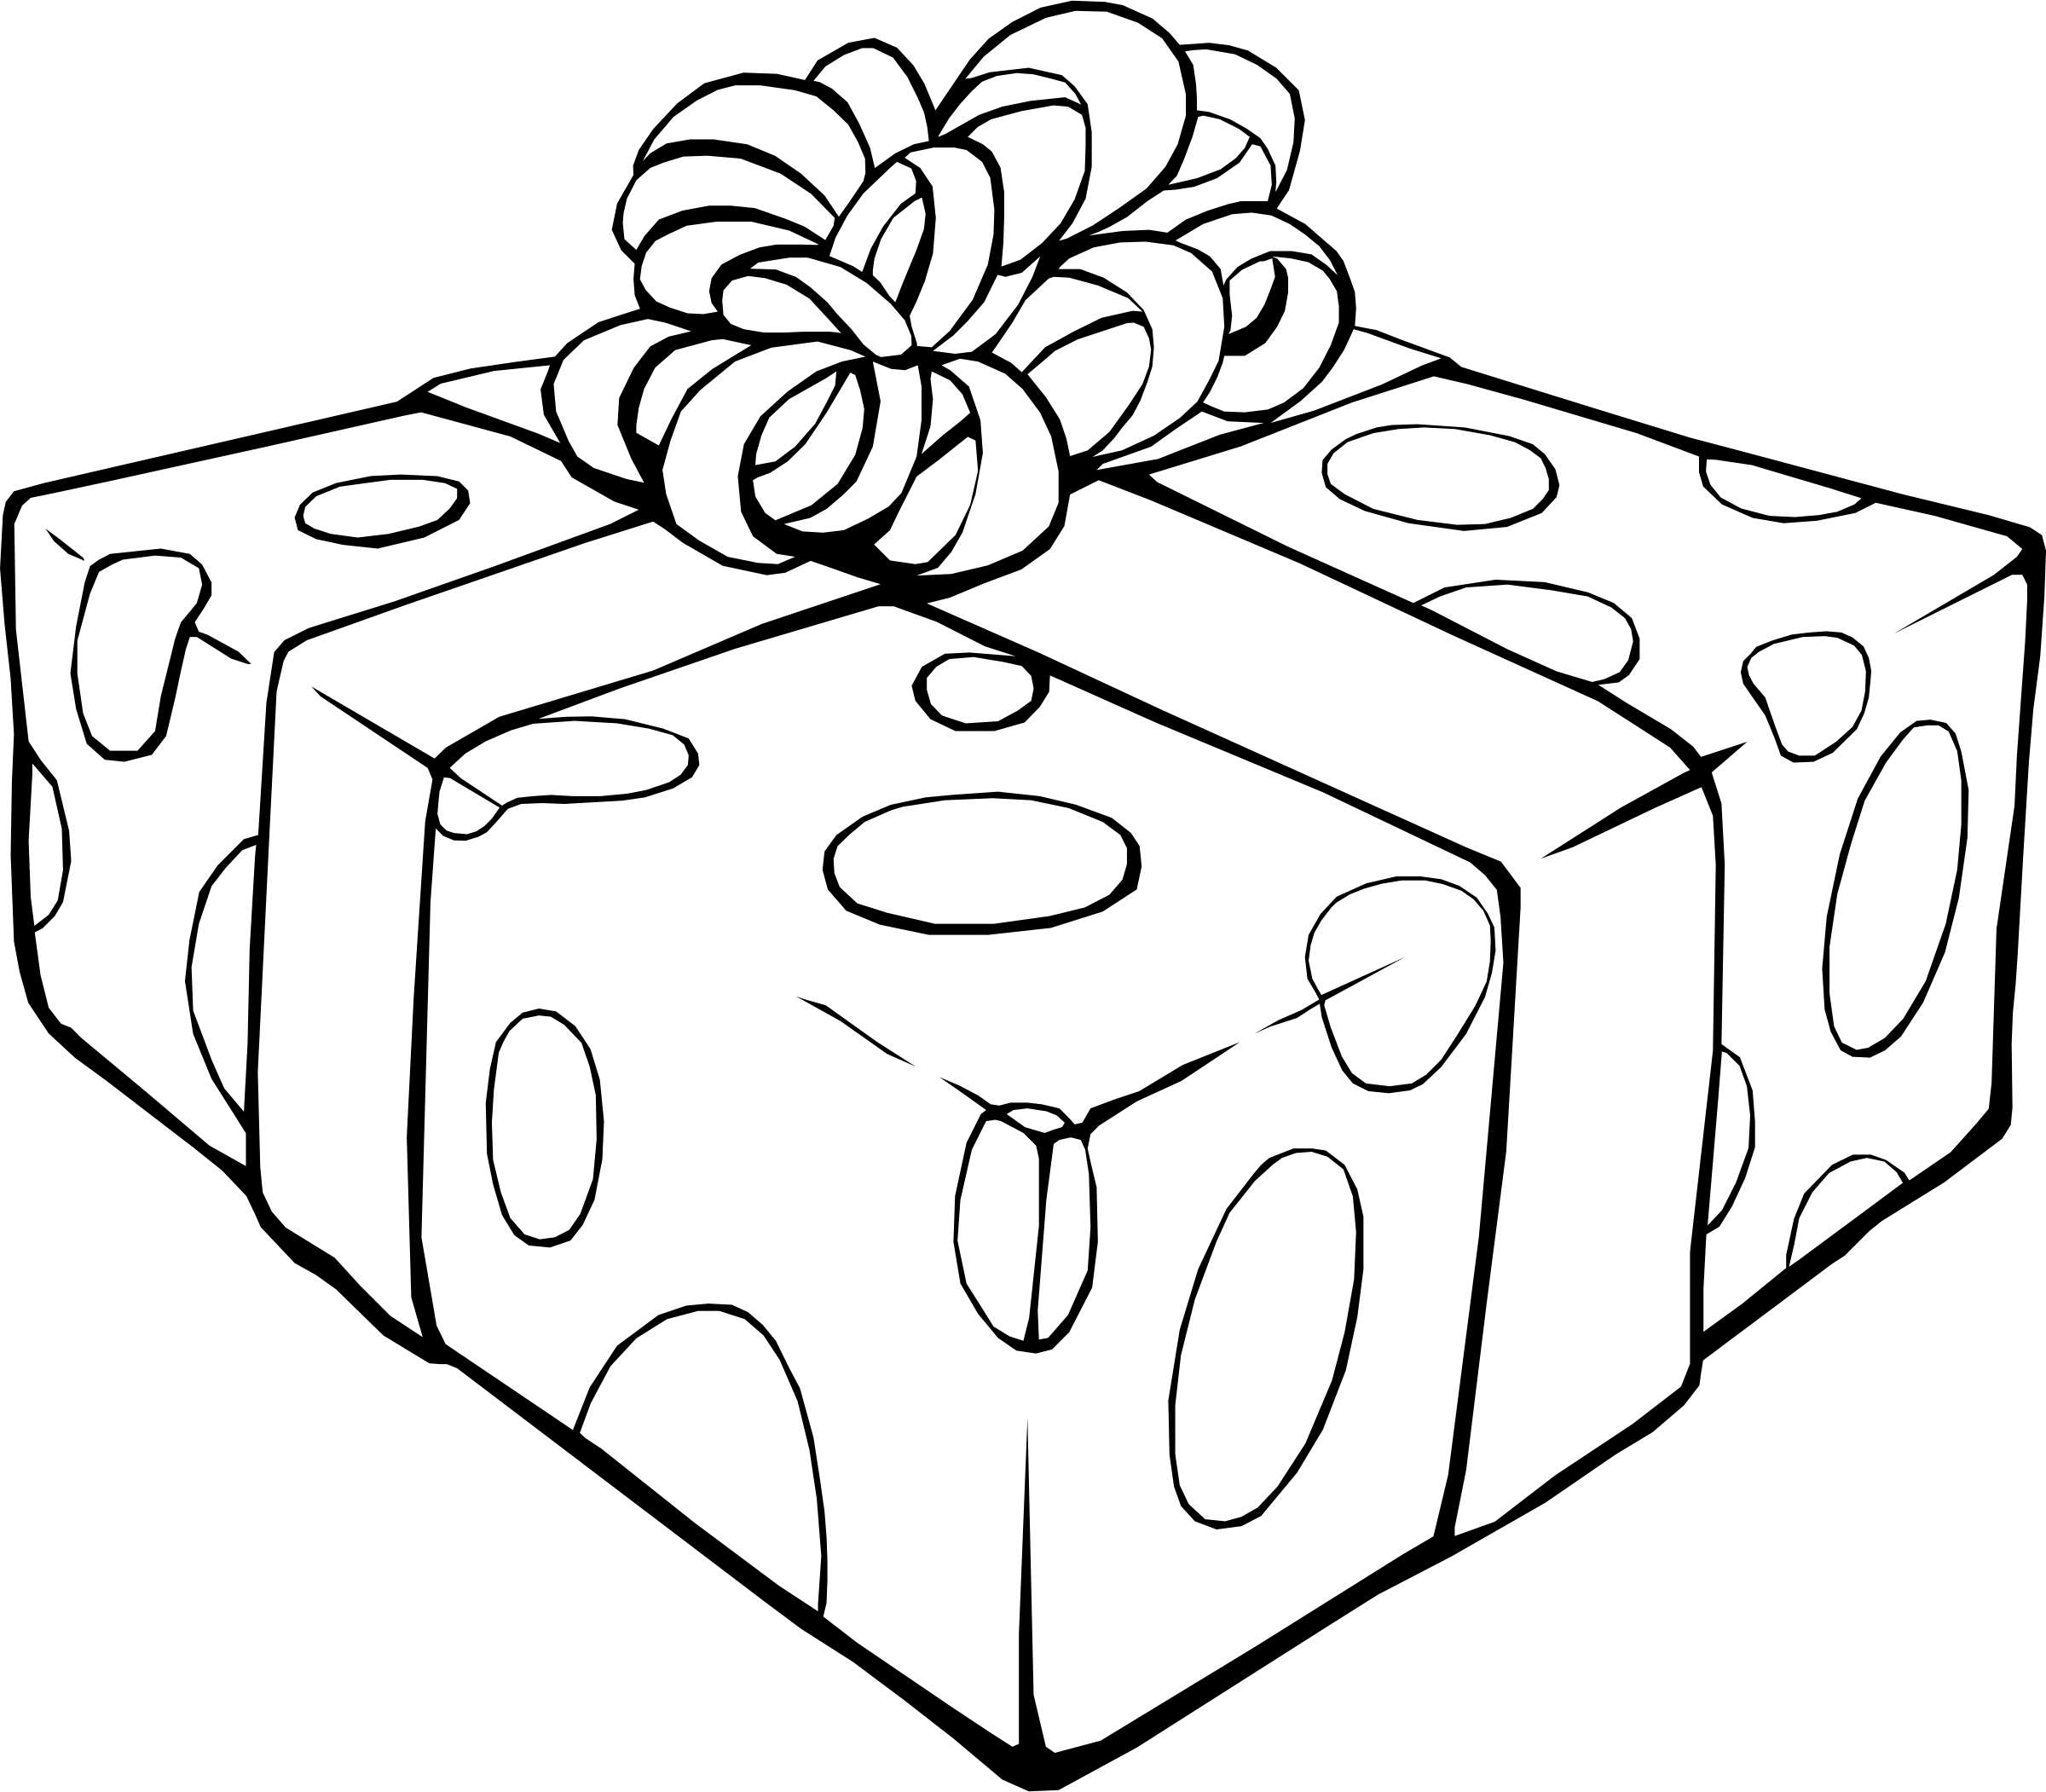 Clipart birthday outline. Present drawing at getdrawings